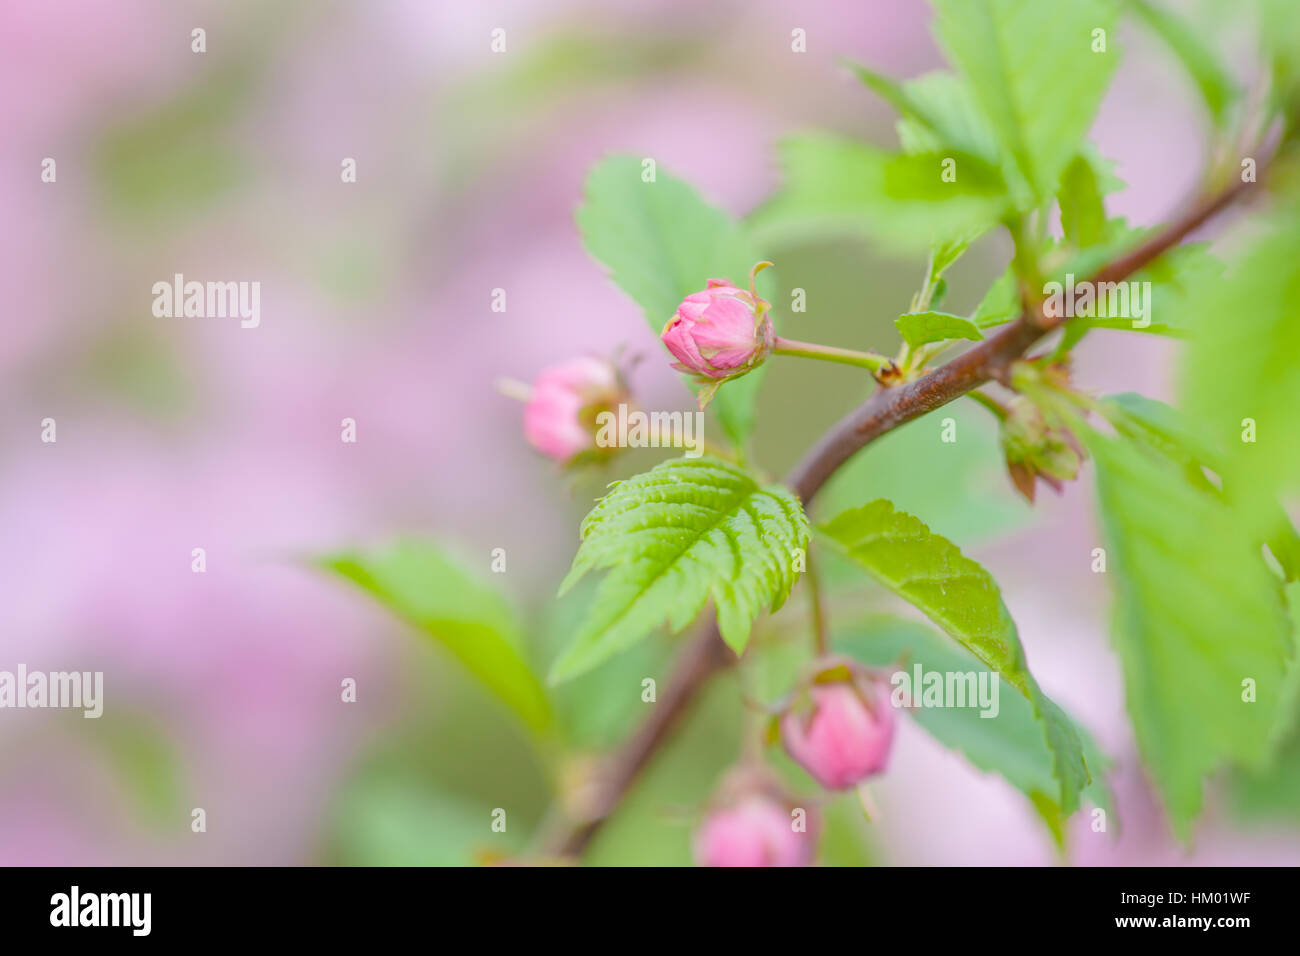 Pink flowers of flowering plum or flowering almond Prunus triloba. Sometimes the tree is called a shrubby cherry. The joy and beauty of spring season. Stock Photo